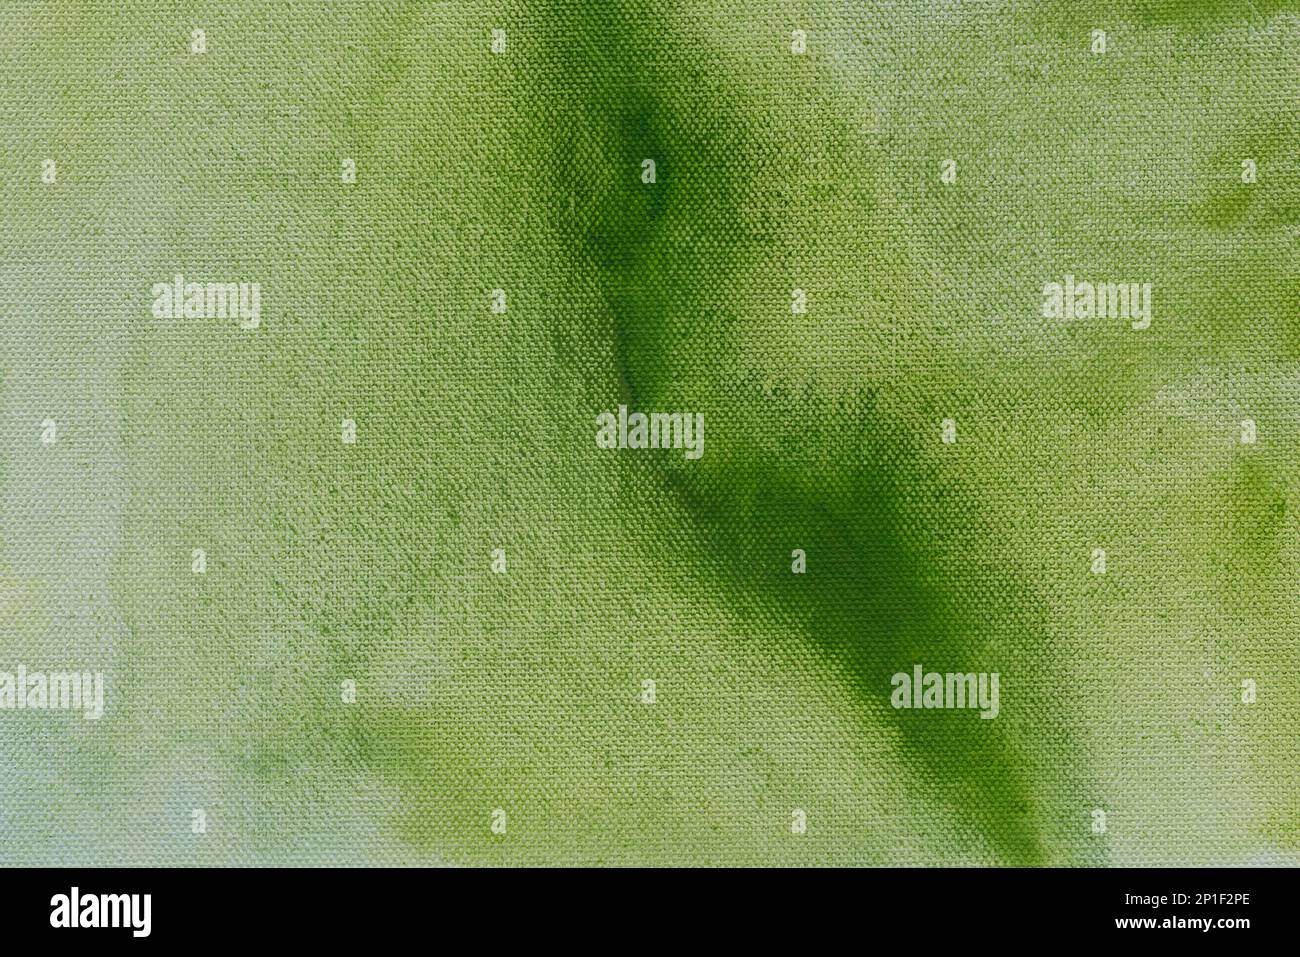 green color painted on canvas background texture Stock Photo